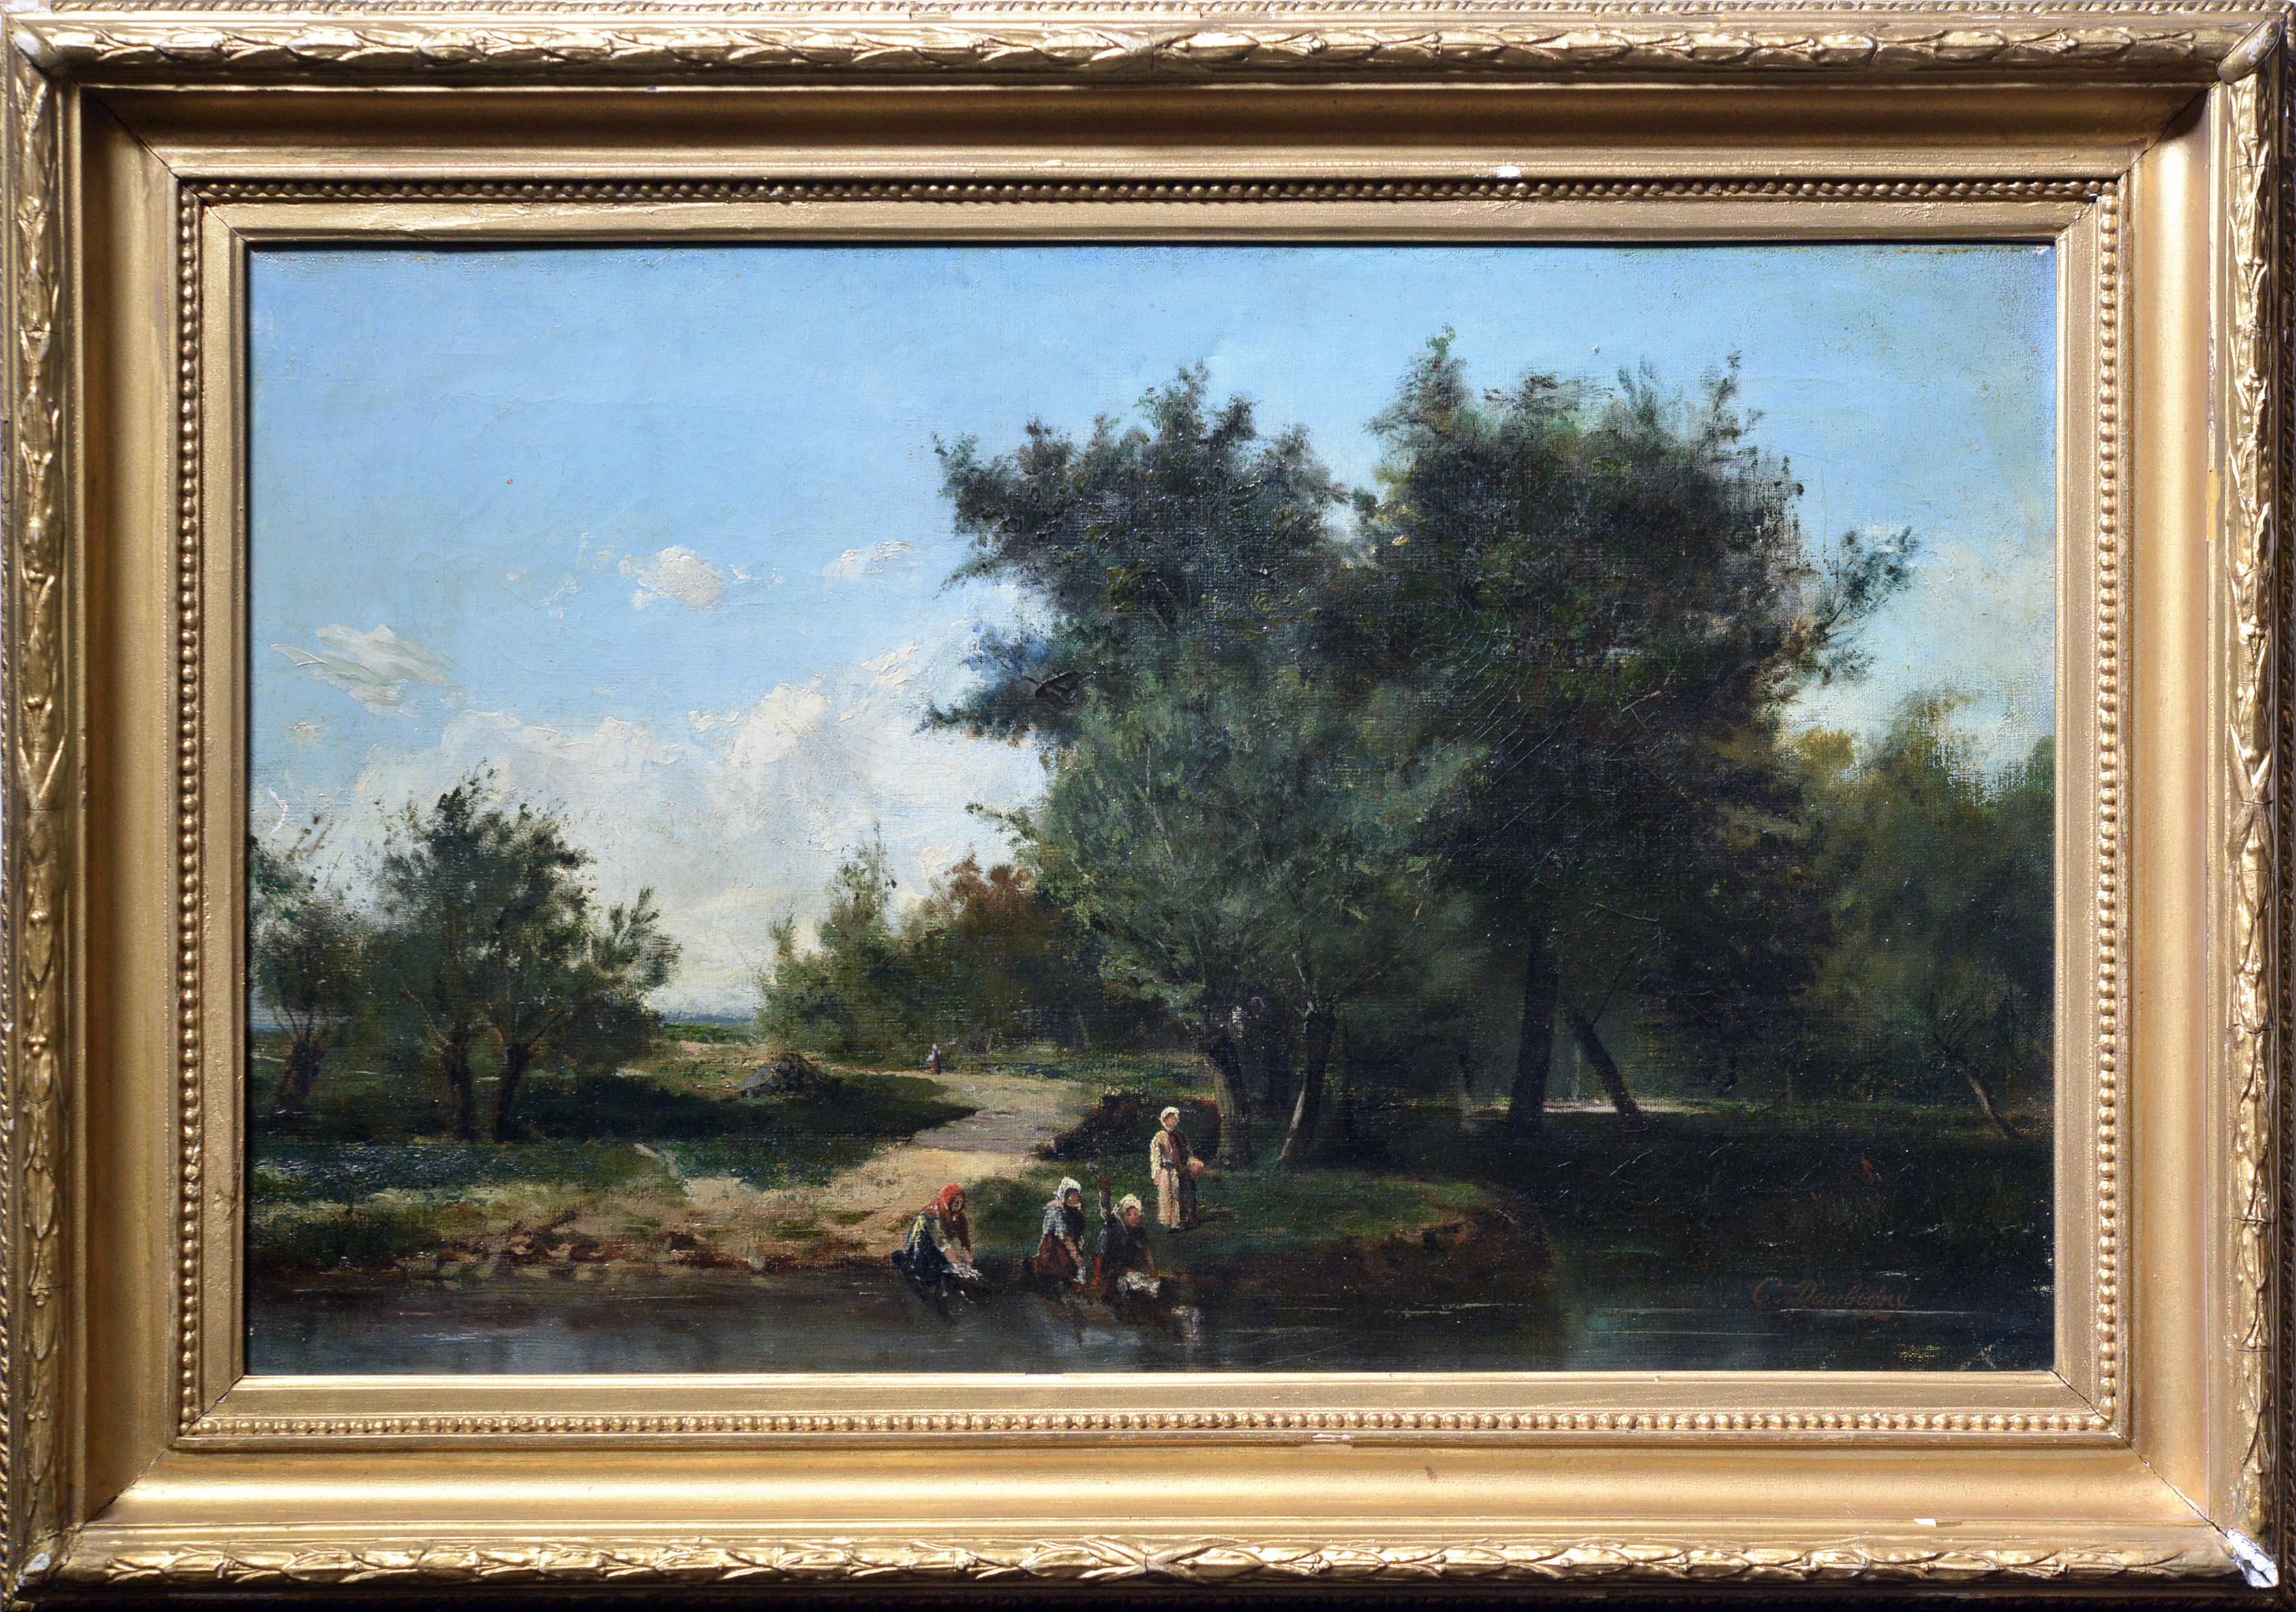 Unknown Landscape Painting - Laundresses on River 19th century Barbizonian Landscape by French Master